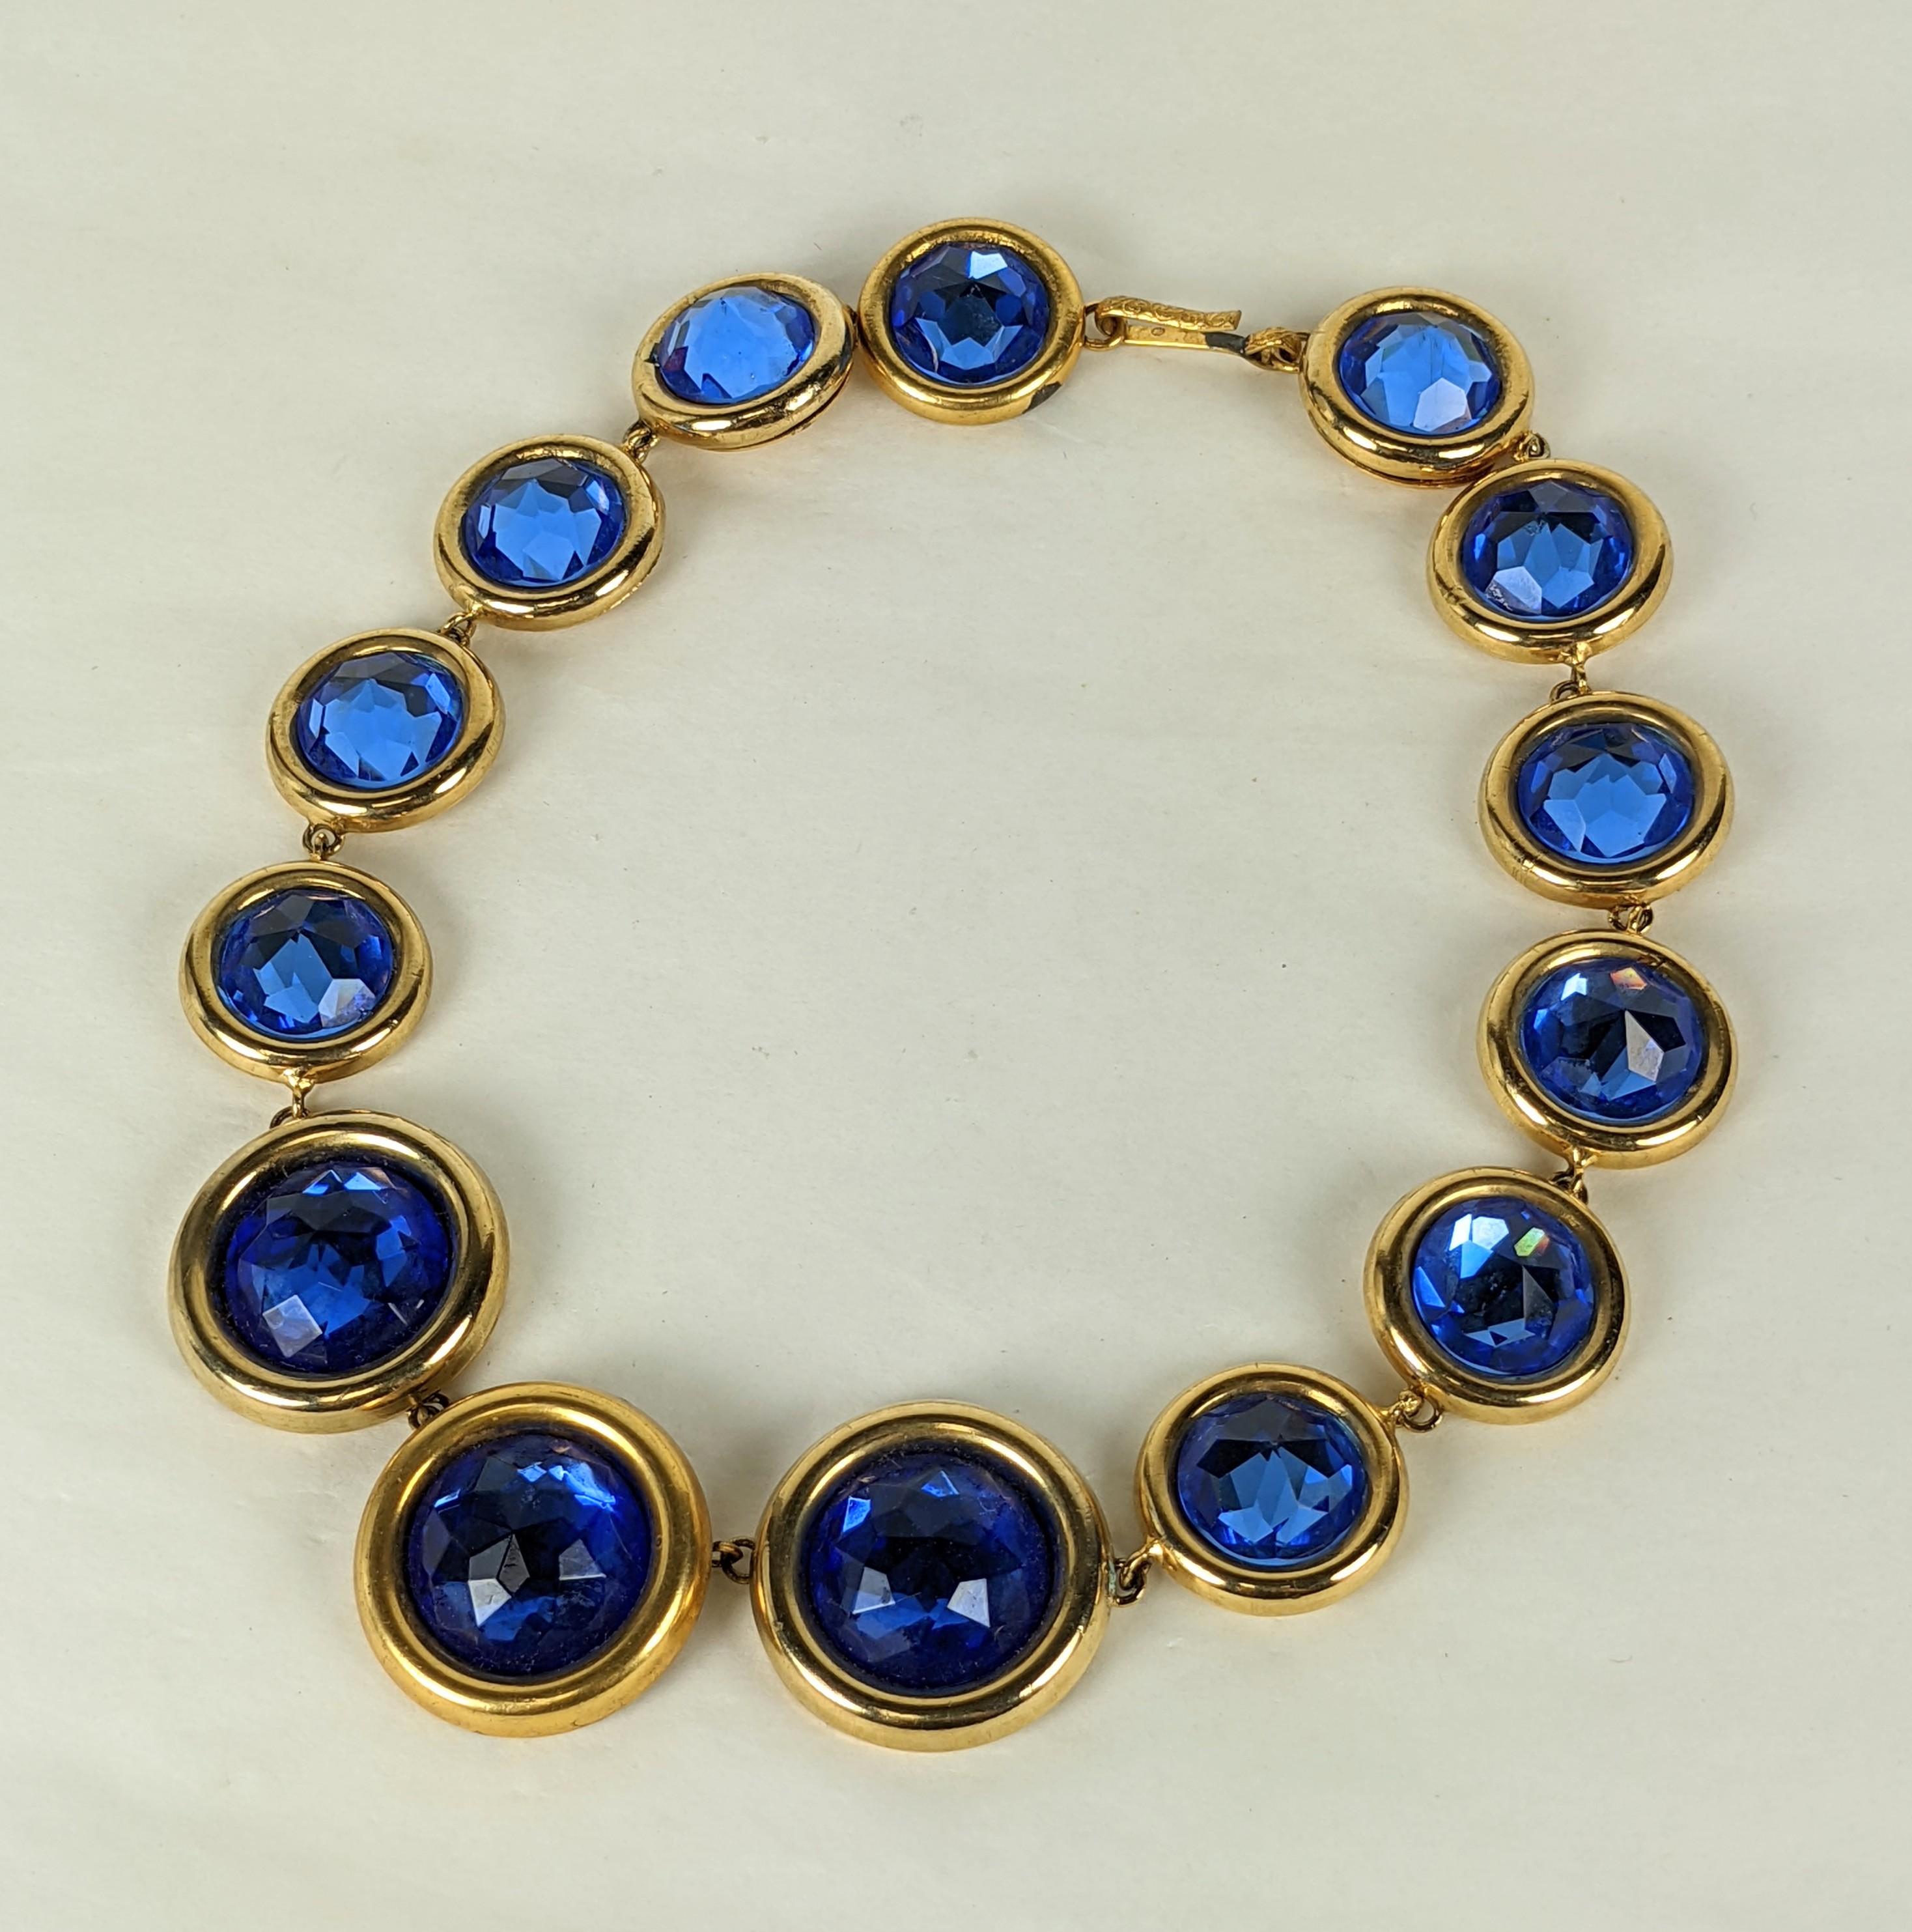 Hubert de Givenchy Haute Couture sapphire crystal riviere. The choker style necklace of graduated rose cut faceted crystals. Bezel set in graduated gilt plate round walled and ridged settings. Hook and eye closure. Made in France.  Provenance Bunny